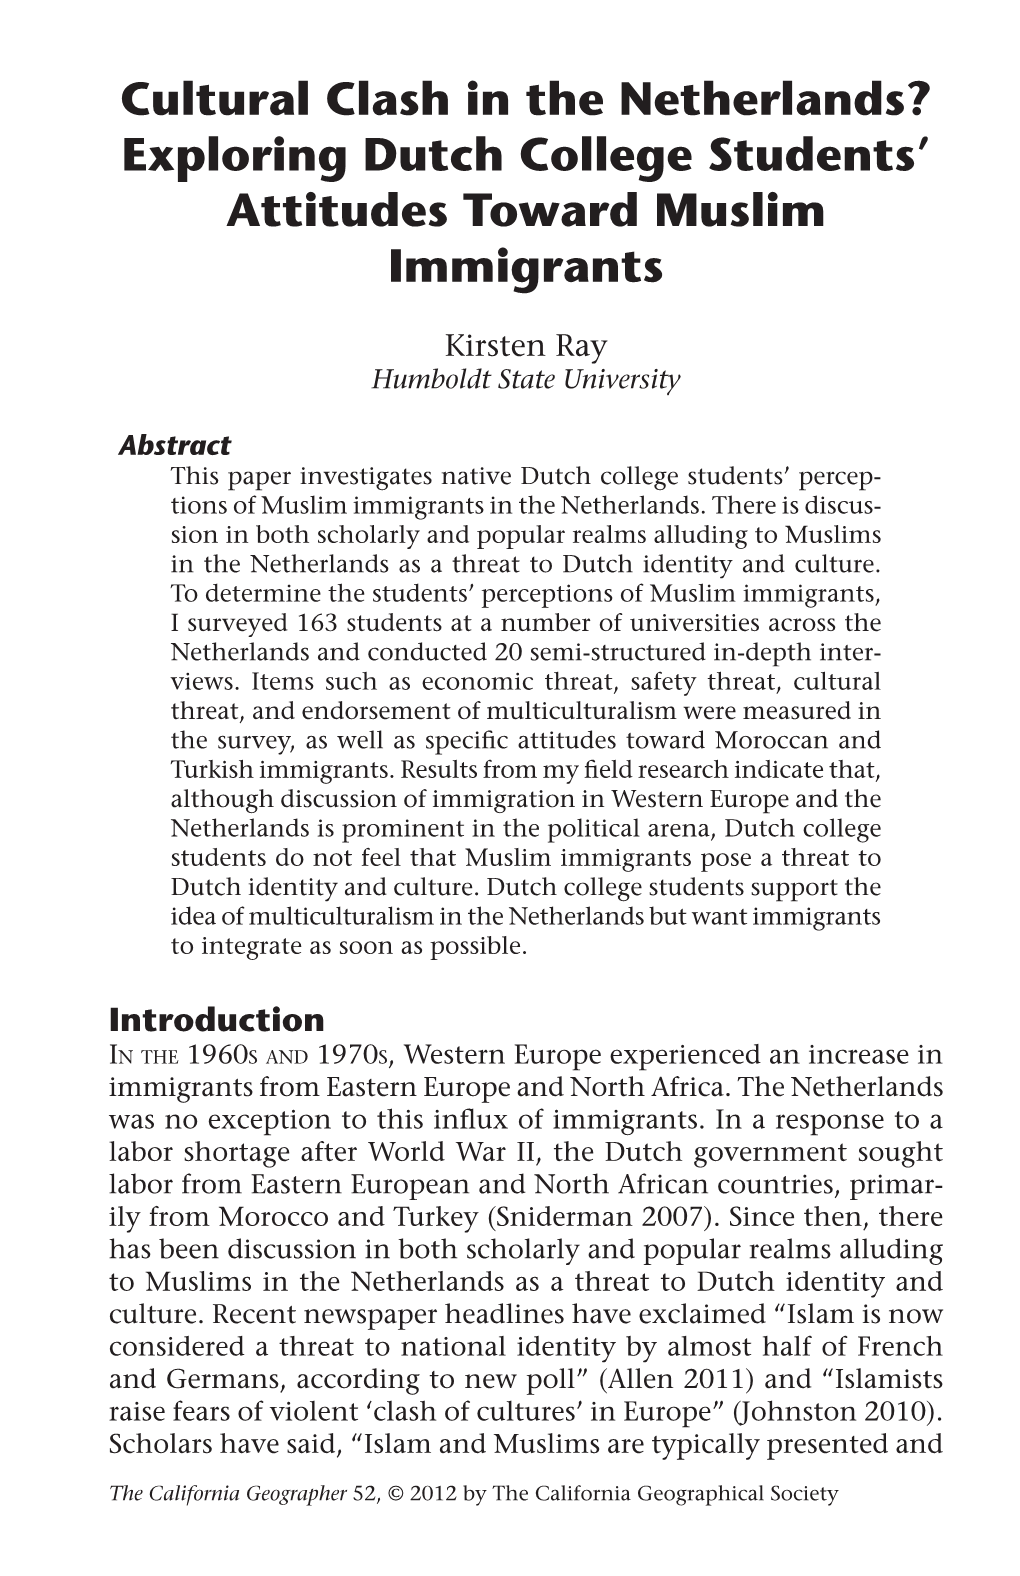 Cultural Clash in the Netherlands? Exploring Dutch College Students' Attitudes Toward Muslim Immigrants